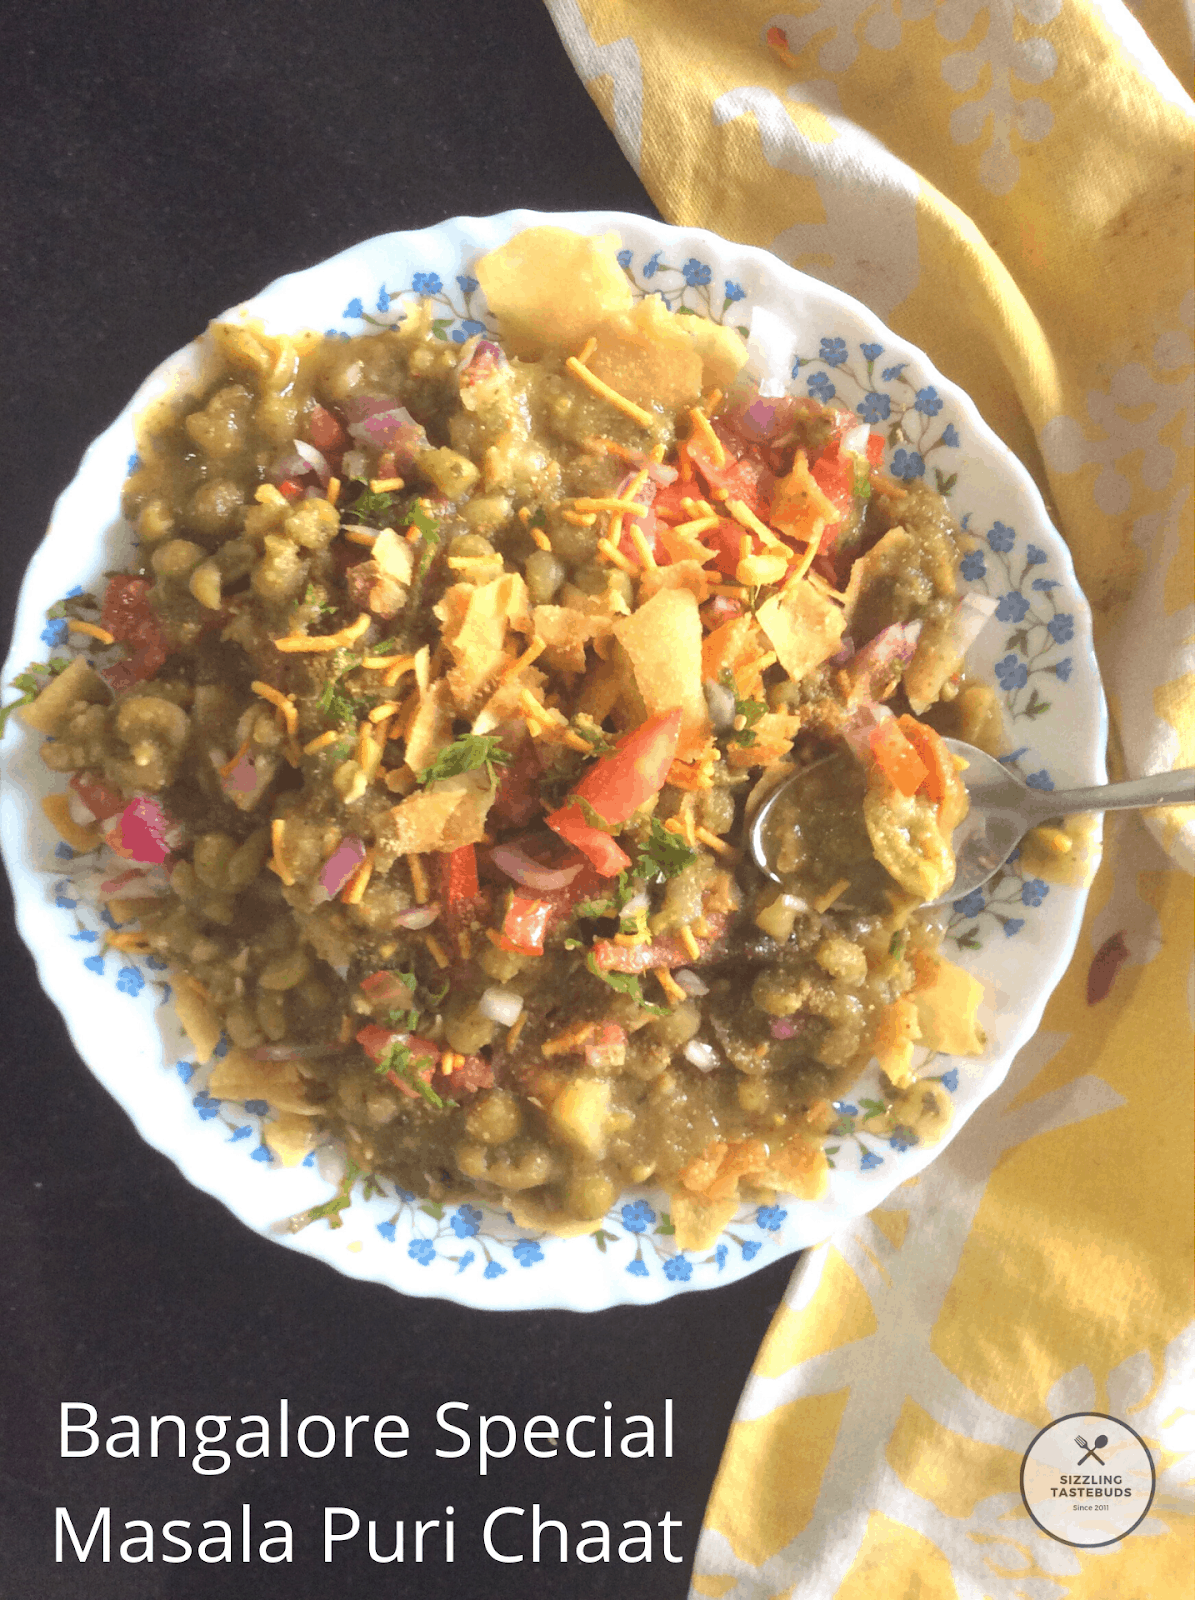 Masala Puri or Masaal Puri is an iconic Street food or Chaat dish made in and around Bangalore. It is a delicious chaat made with soaked and cooked legumes served with a variety of condiments.